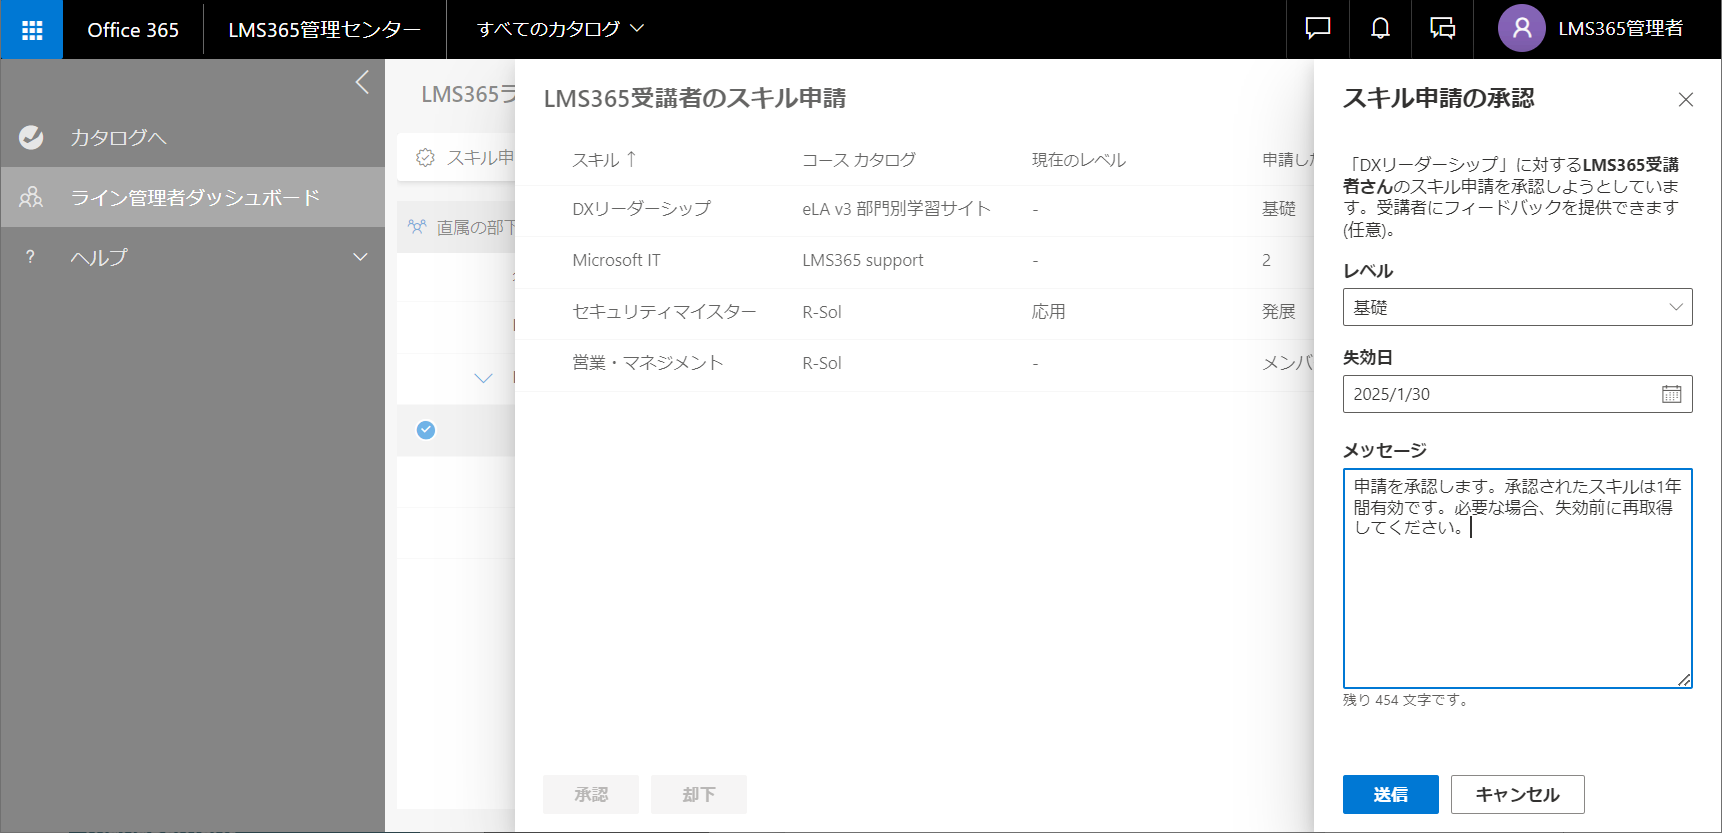 Line Manager Dashboard_User administration23.png